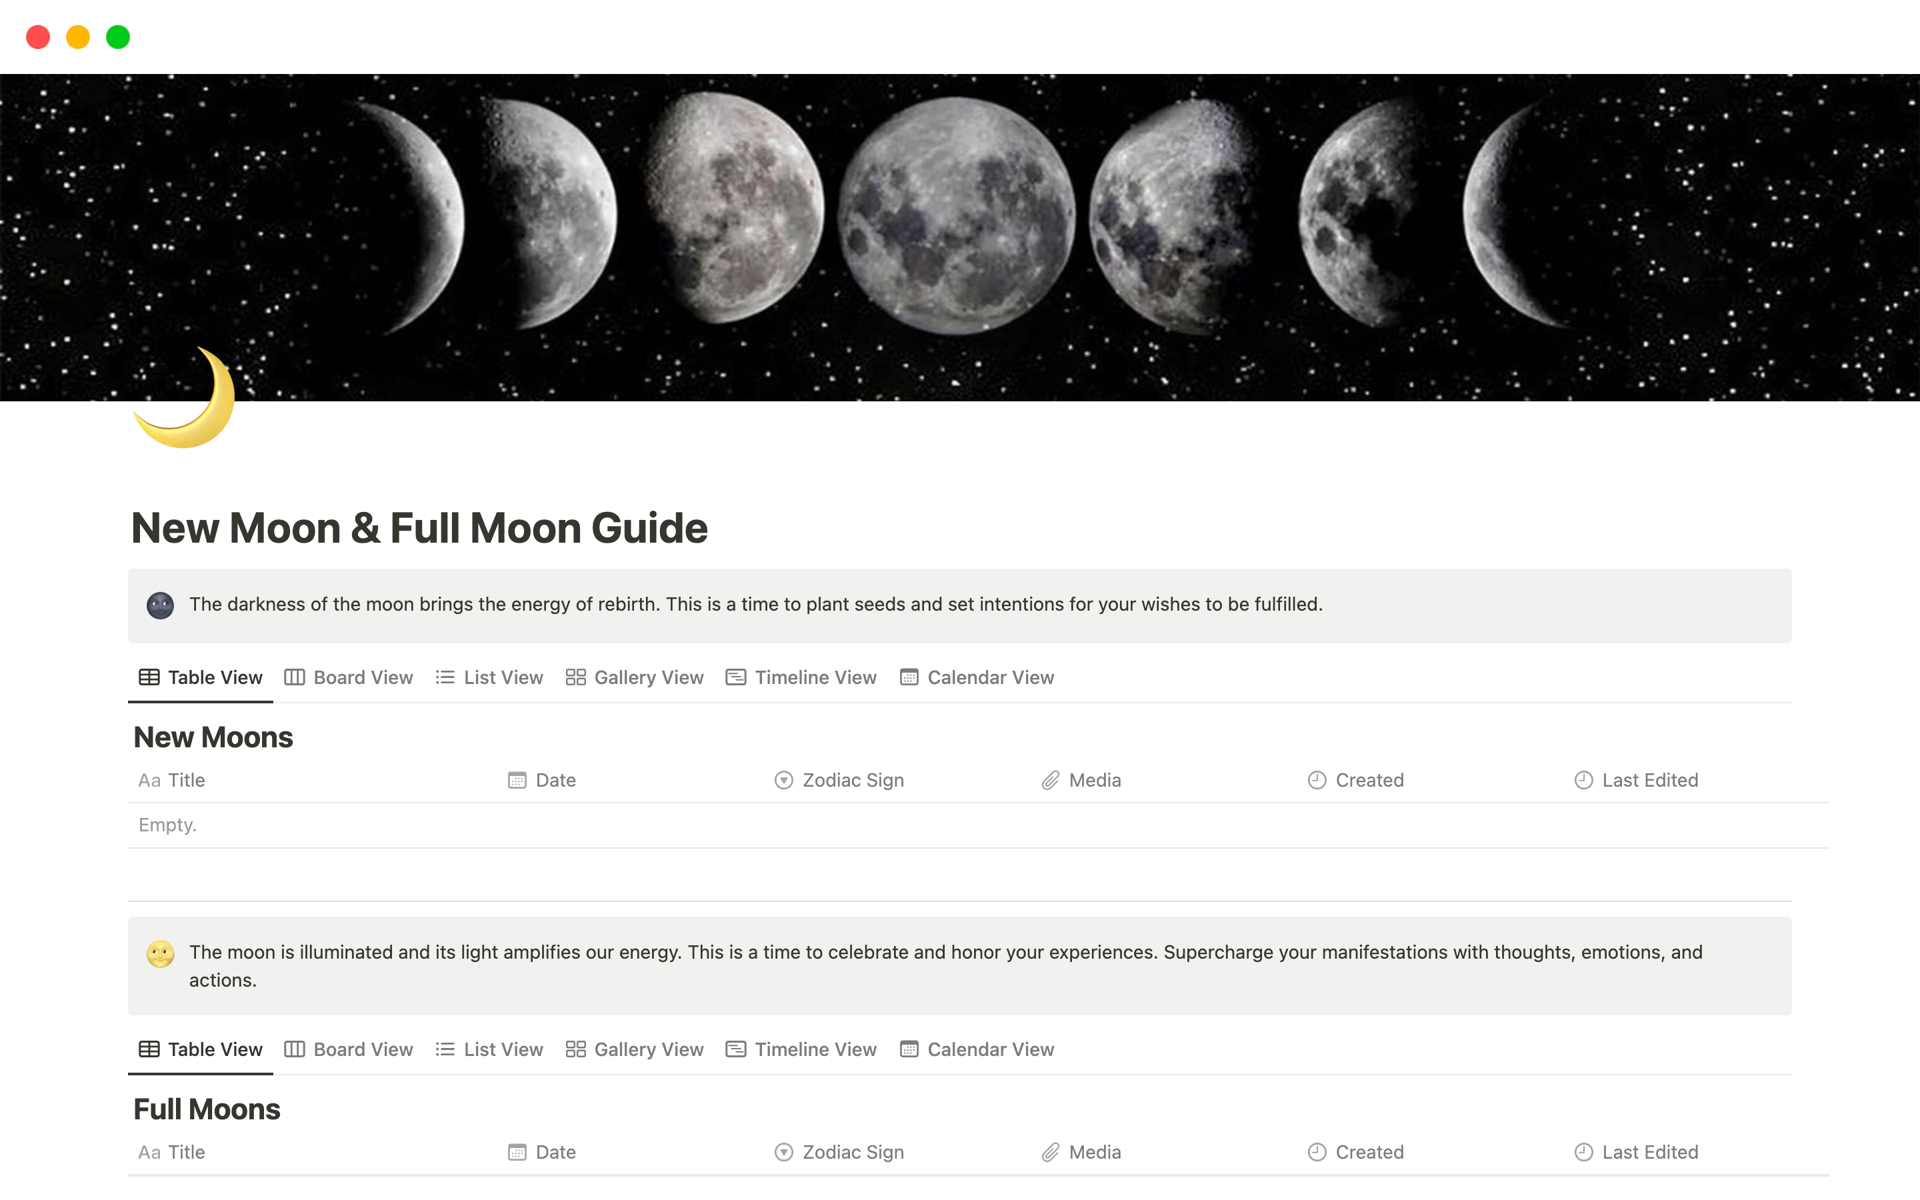 Unlock the mystical energies of the lunar cycle with this intuitive New Moon and Full Moon guide template on Notion, providing you with insightful prompts and reflections to align your intentions and cultivate spiritual growth during these celestial phases.